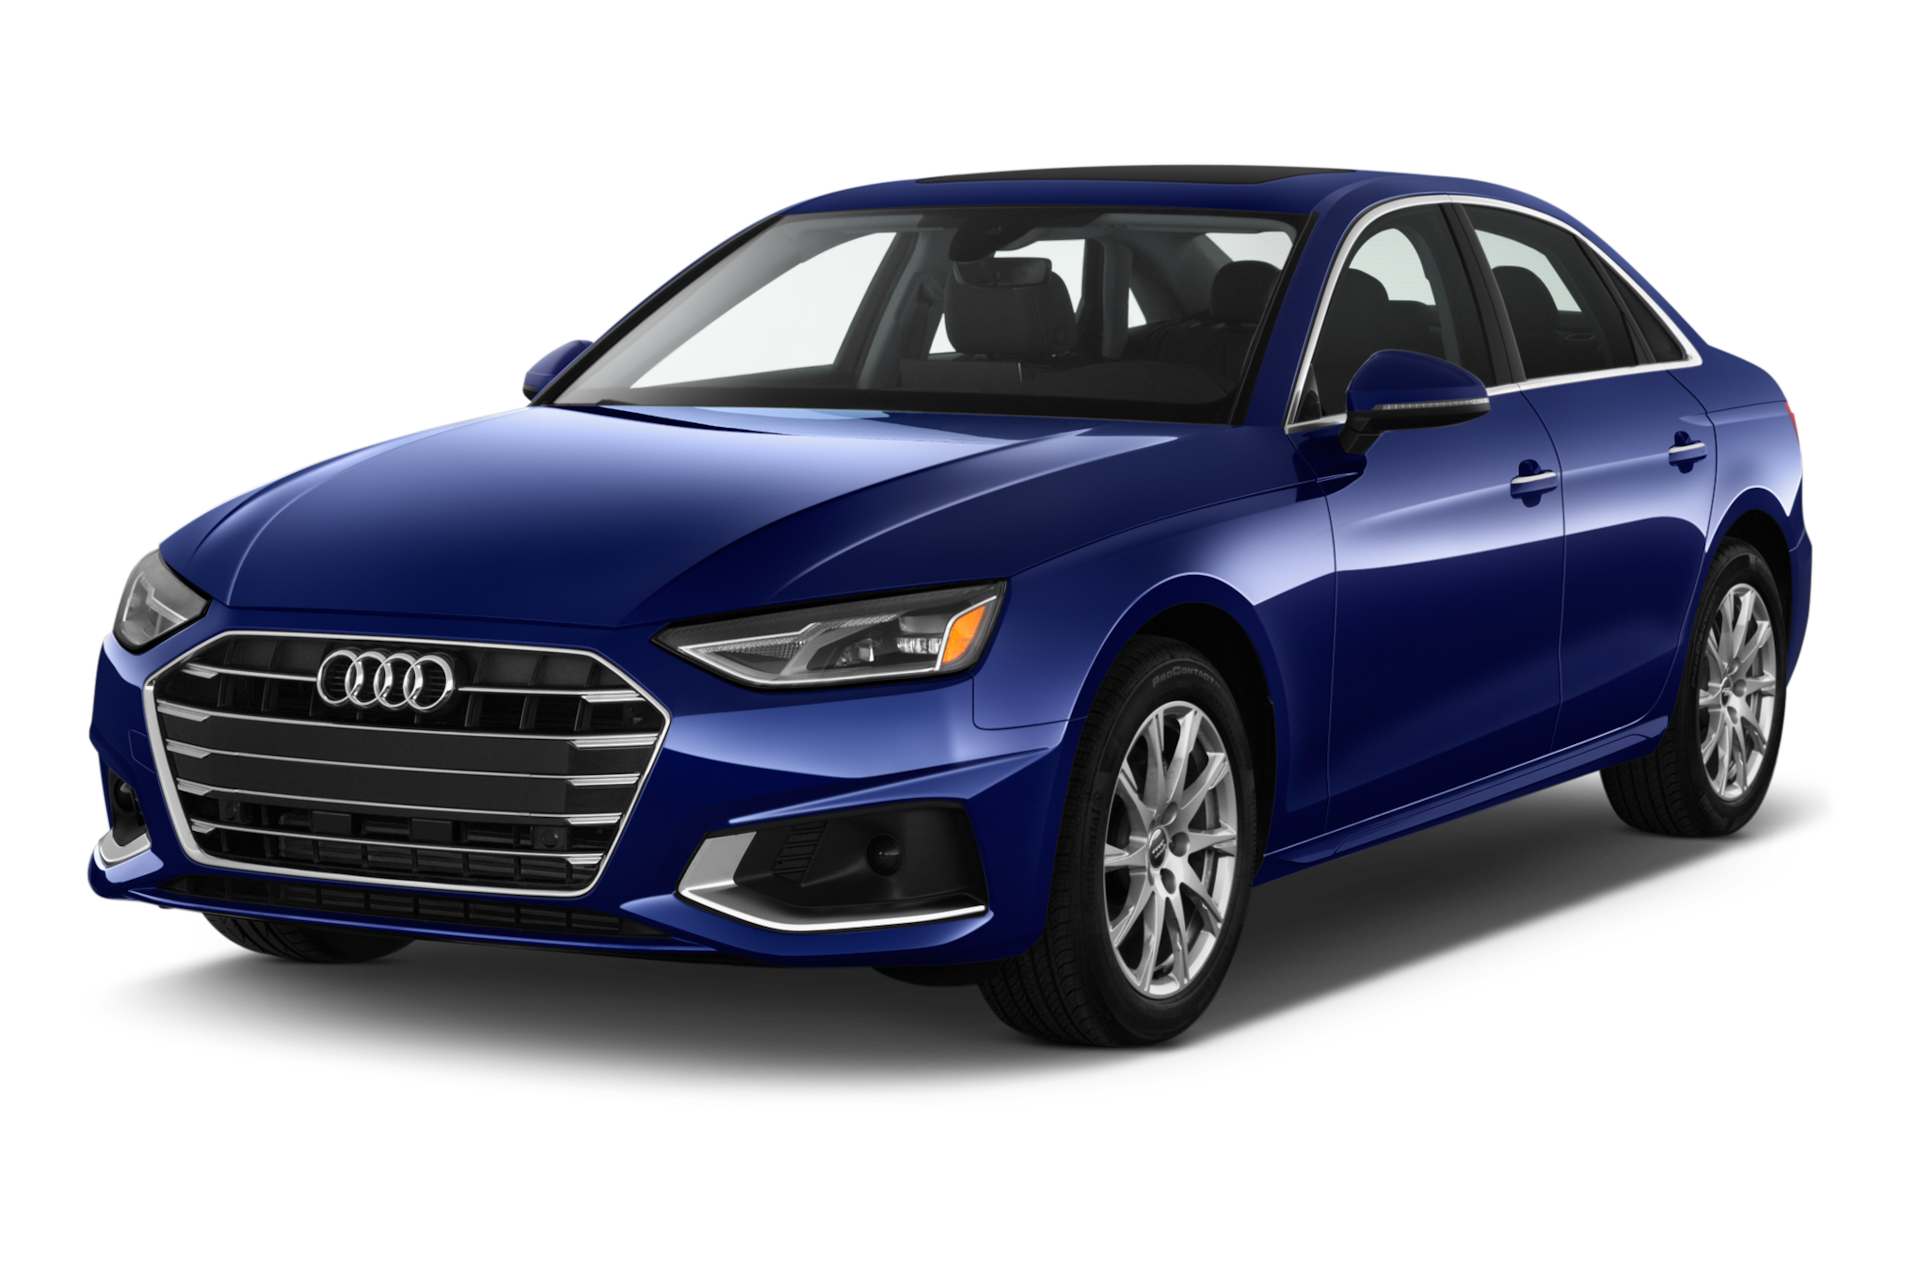 2021 Audi A4 Prices, Reviews, and Photos - MotorTrend